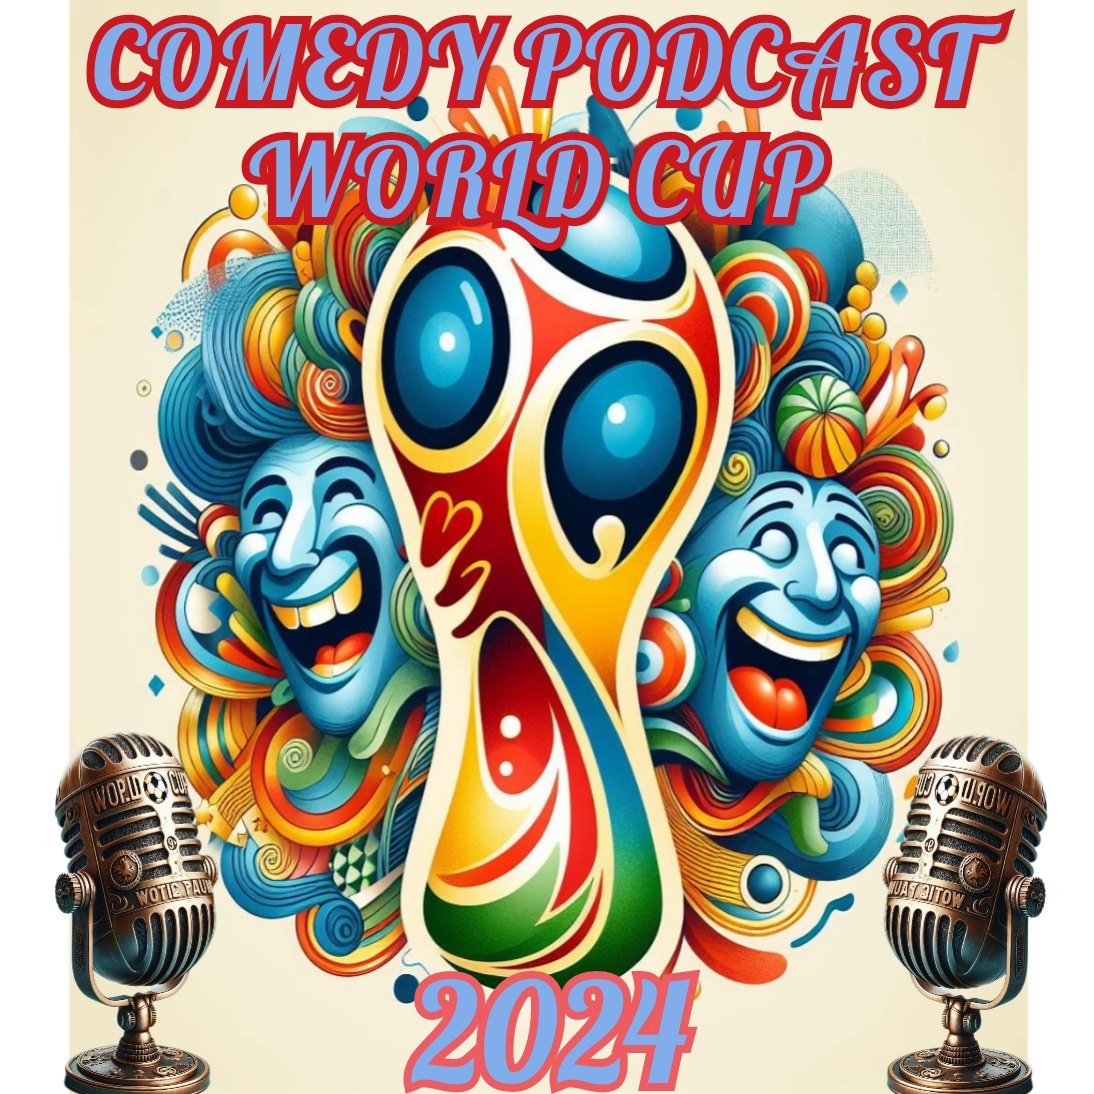 Comedy Podcast 2024 nominations have begun Post your favourite Comedy Podcasts here to be considered for this year's competition*. *They must have released episodes in the last year. #ComedyPodcastWorldCup